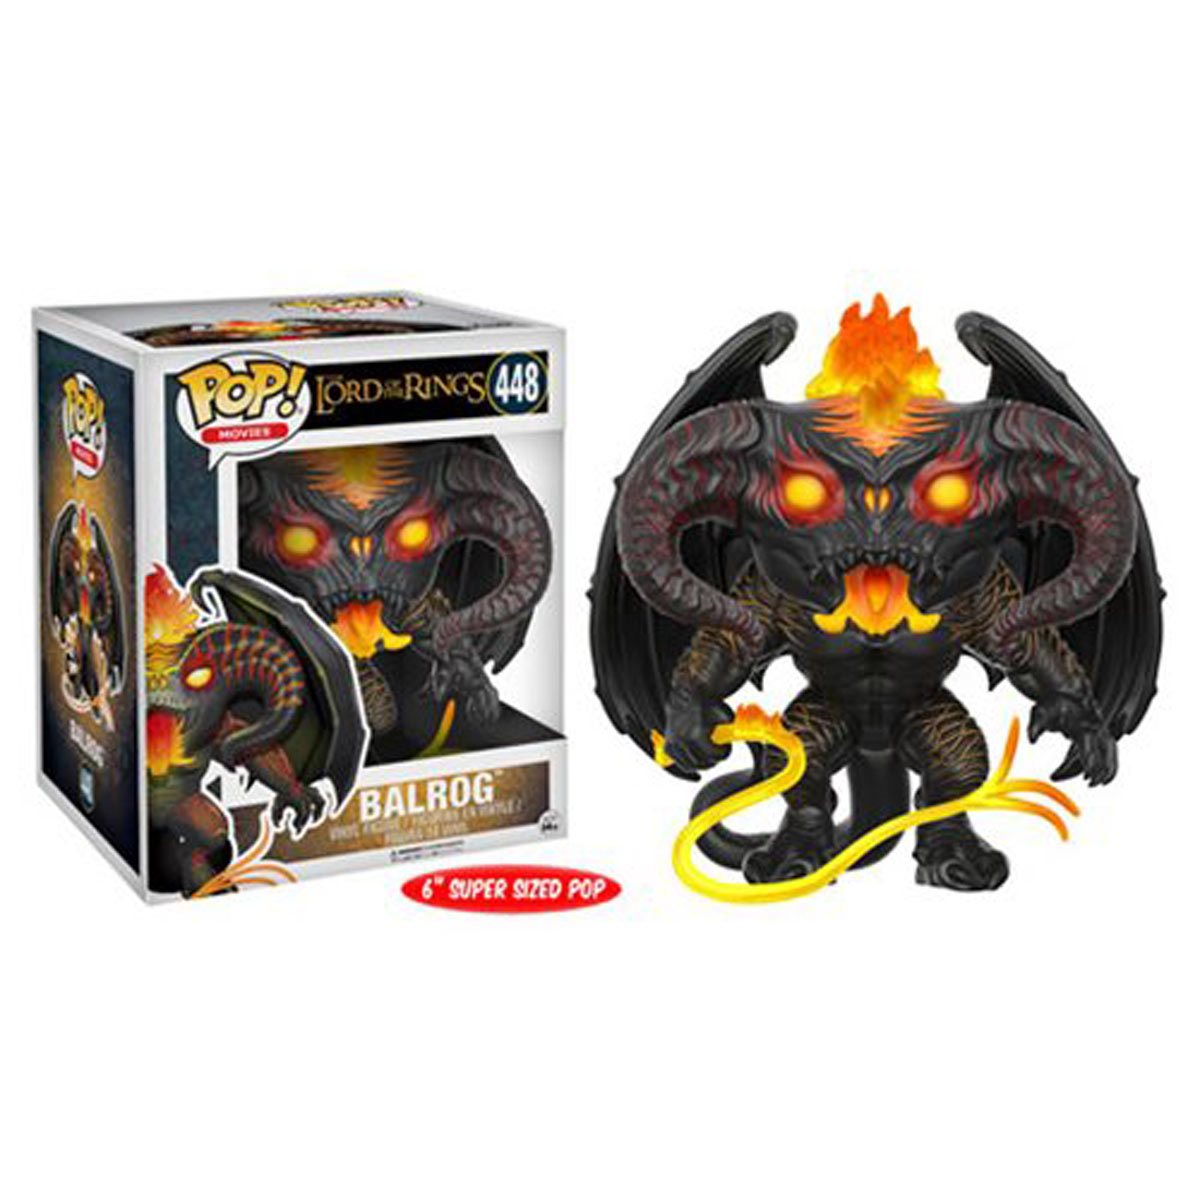 The Lord of the Rings Balrog 6-Inch Funko Pop! Vinyl Figure